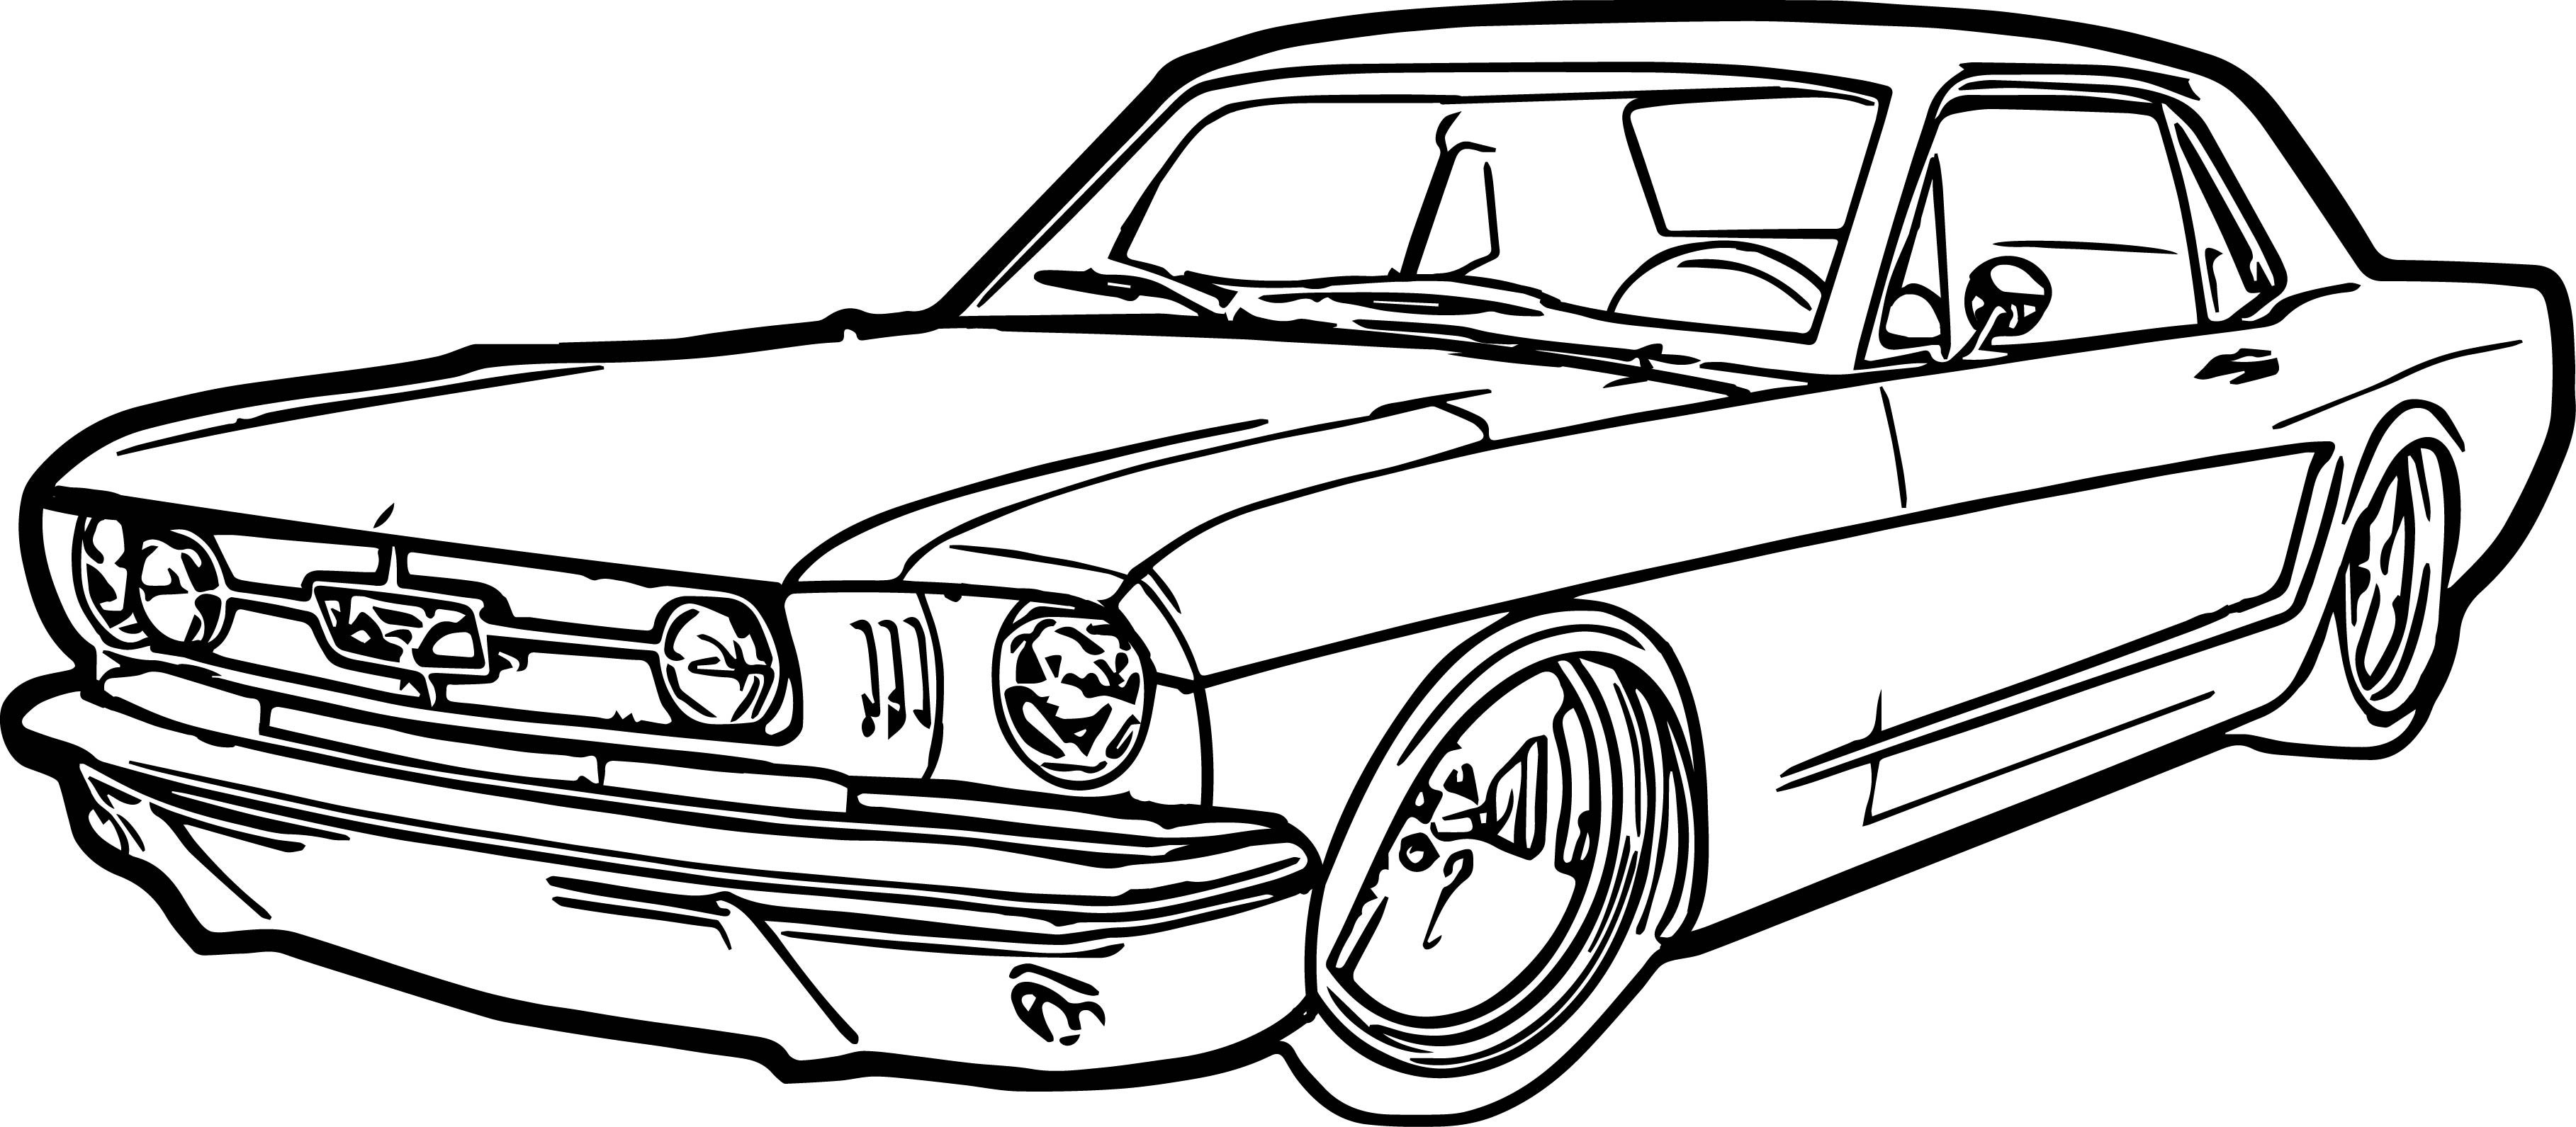 hot car coloring pages